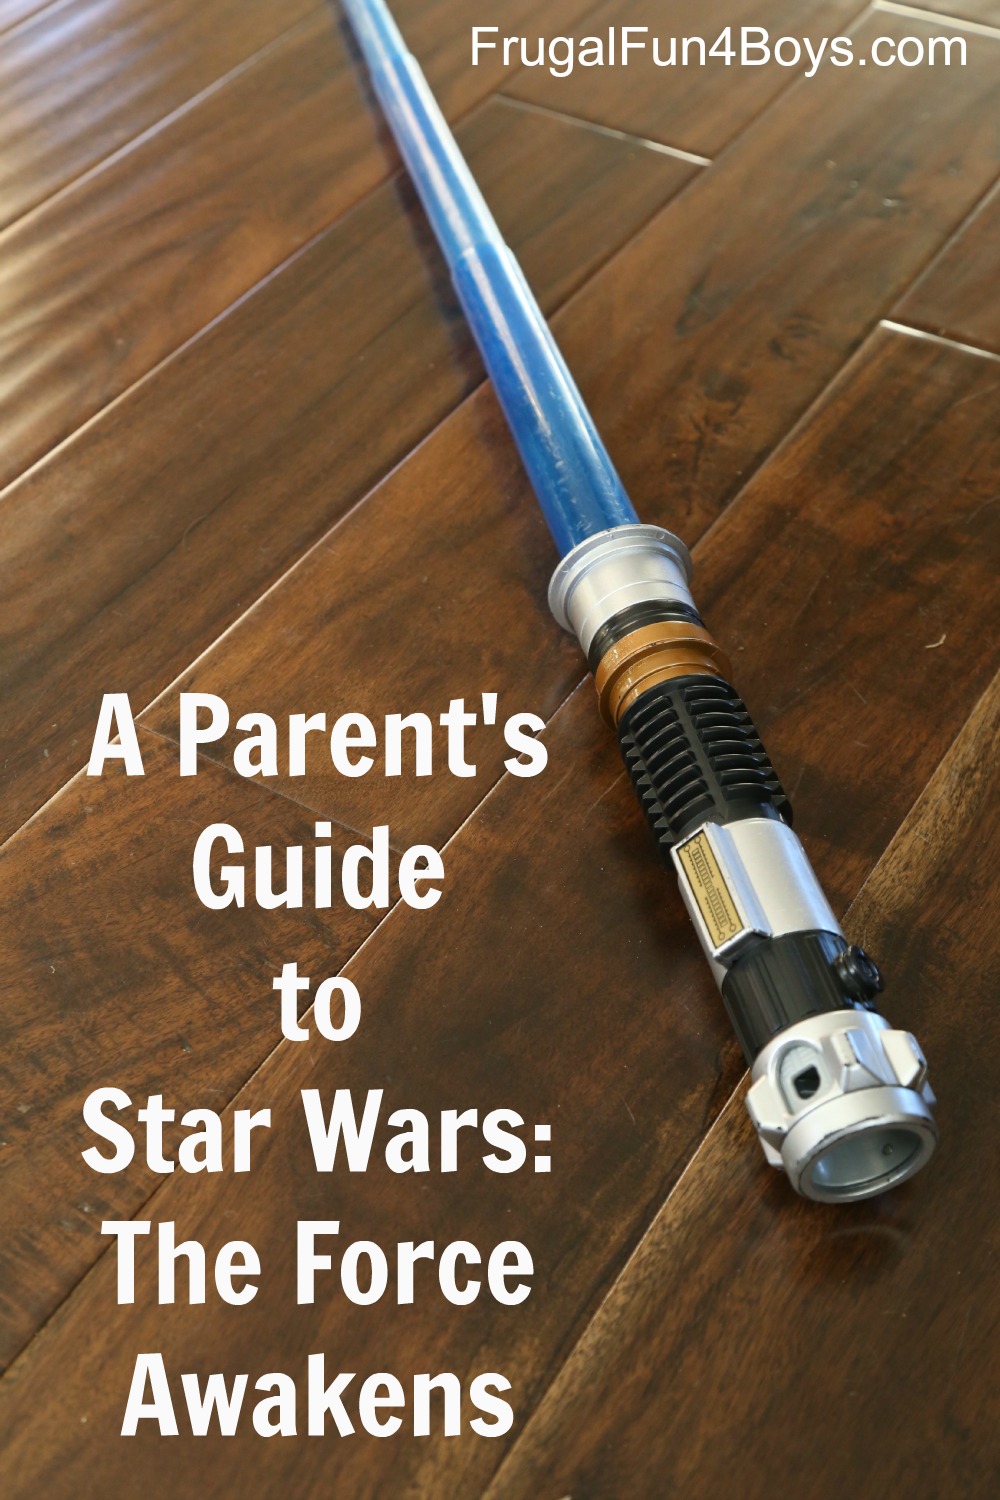 A Parent's Guide and Review of Star Wars: The Force Awakens